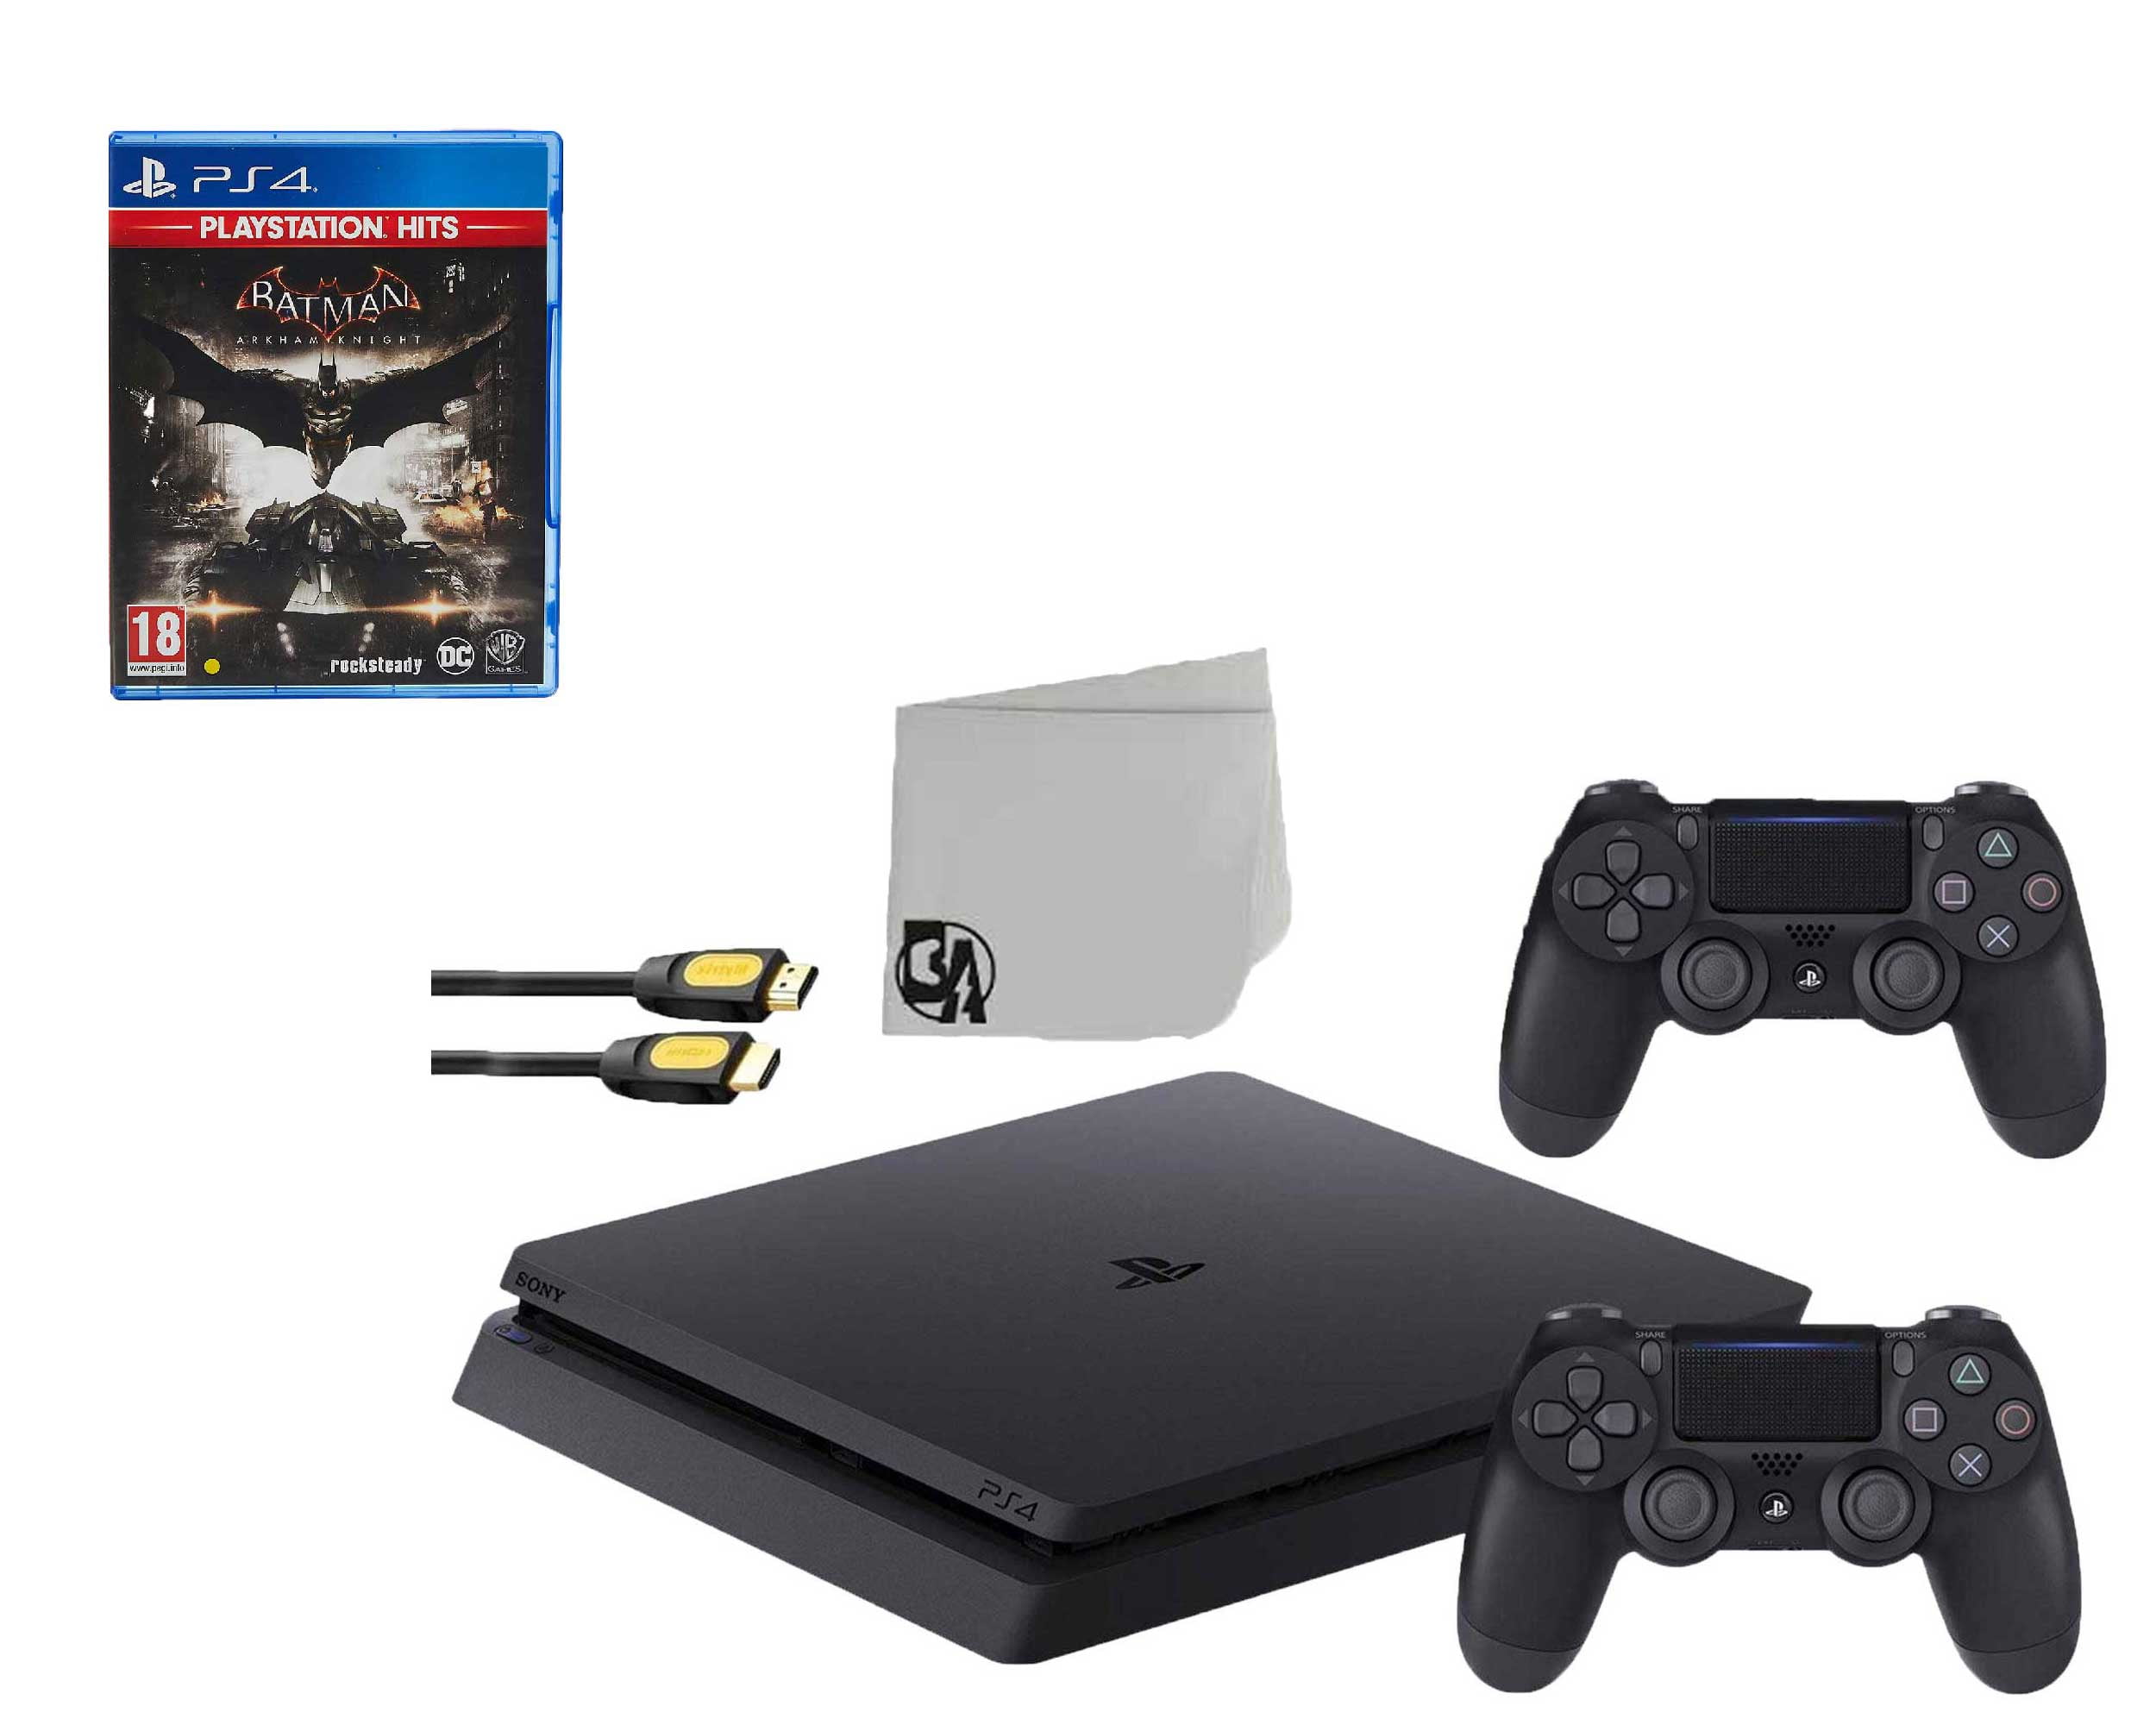 Sony PlayStation 4 Pro 1TB Gaming Console Black 2 Controller Included with  Spider-Man BOLT AXTION Bundle Used